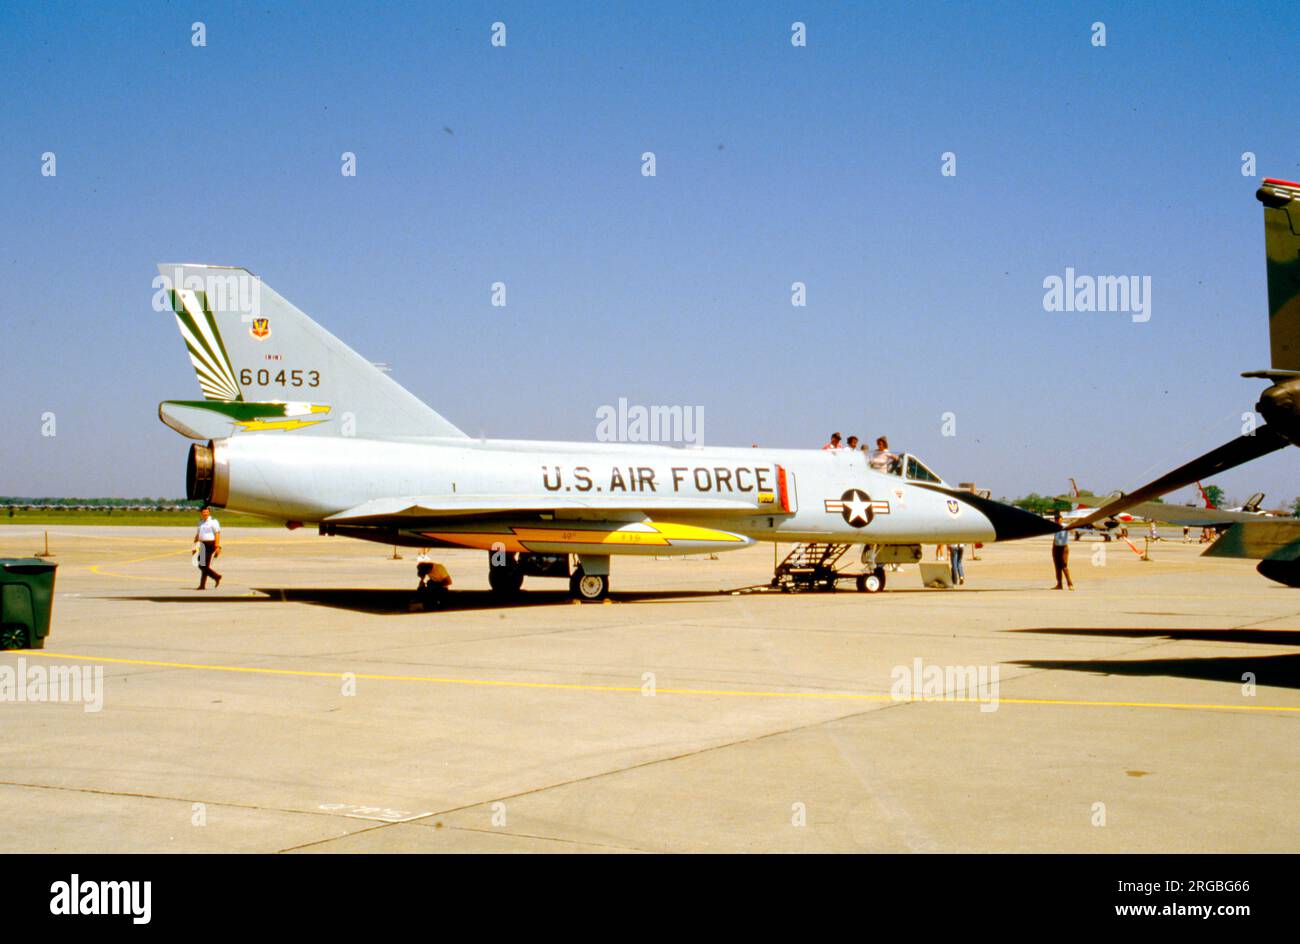 United States Air Force - Convair F-106A Delta Dart 56-0453 (msn 8-24-03), of the 49th Fighter Interceptor Squadron, Griffiss Air Force Base, Rome, NY circa 1982. This aircraft was converted to QF-106A (AD111) and crashed whilst flying from Holloman AFB on 27 January 1995. Stock Photo